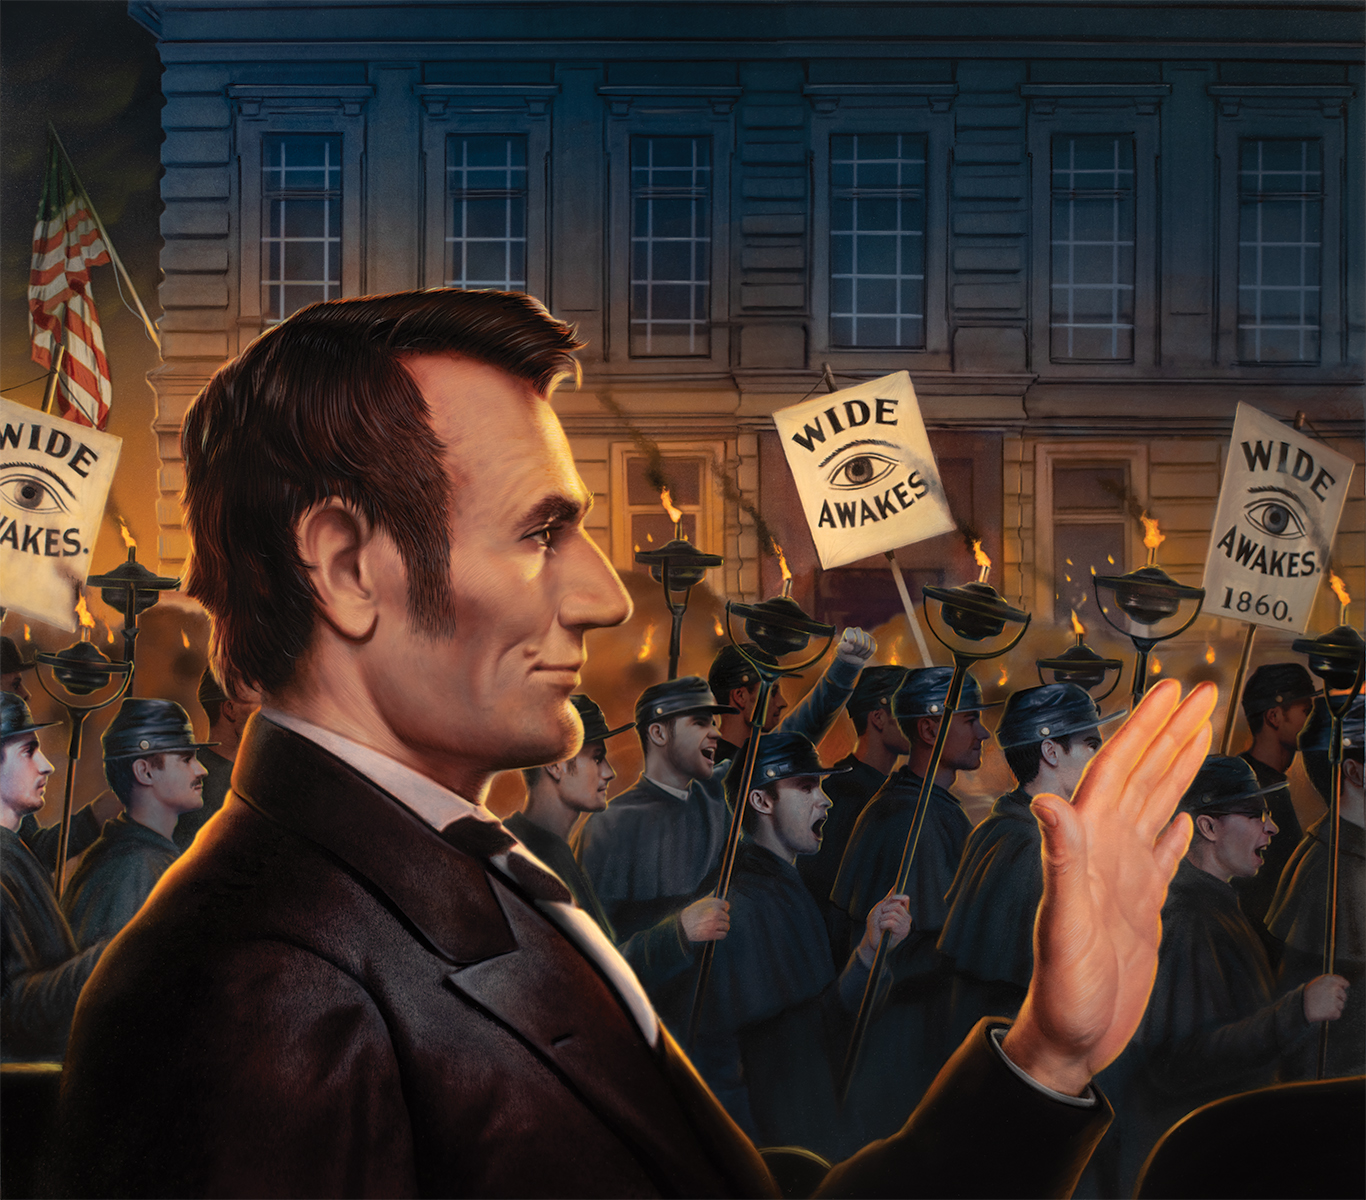  Tim O'Brien Paints Lincoln & The Wide-Awakes